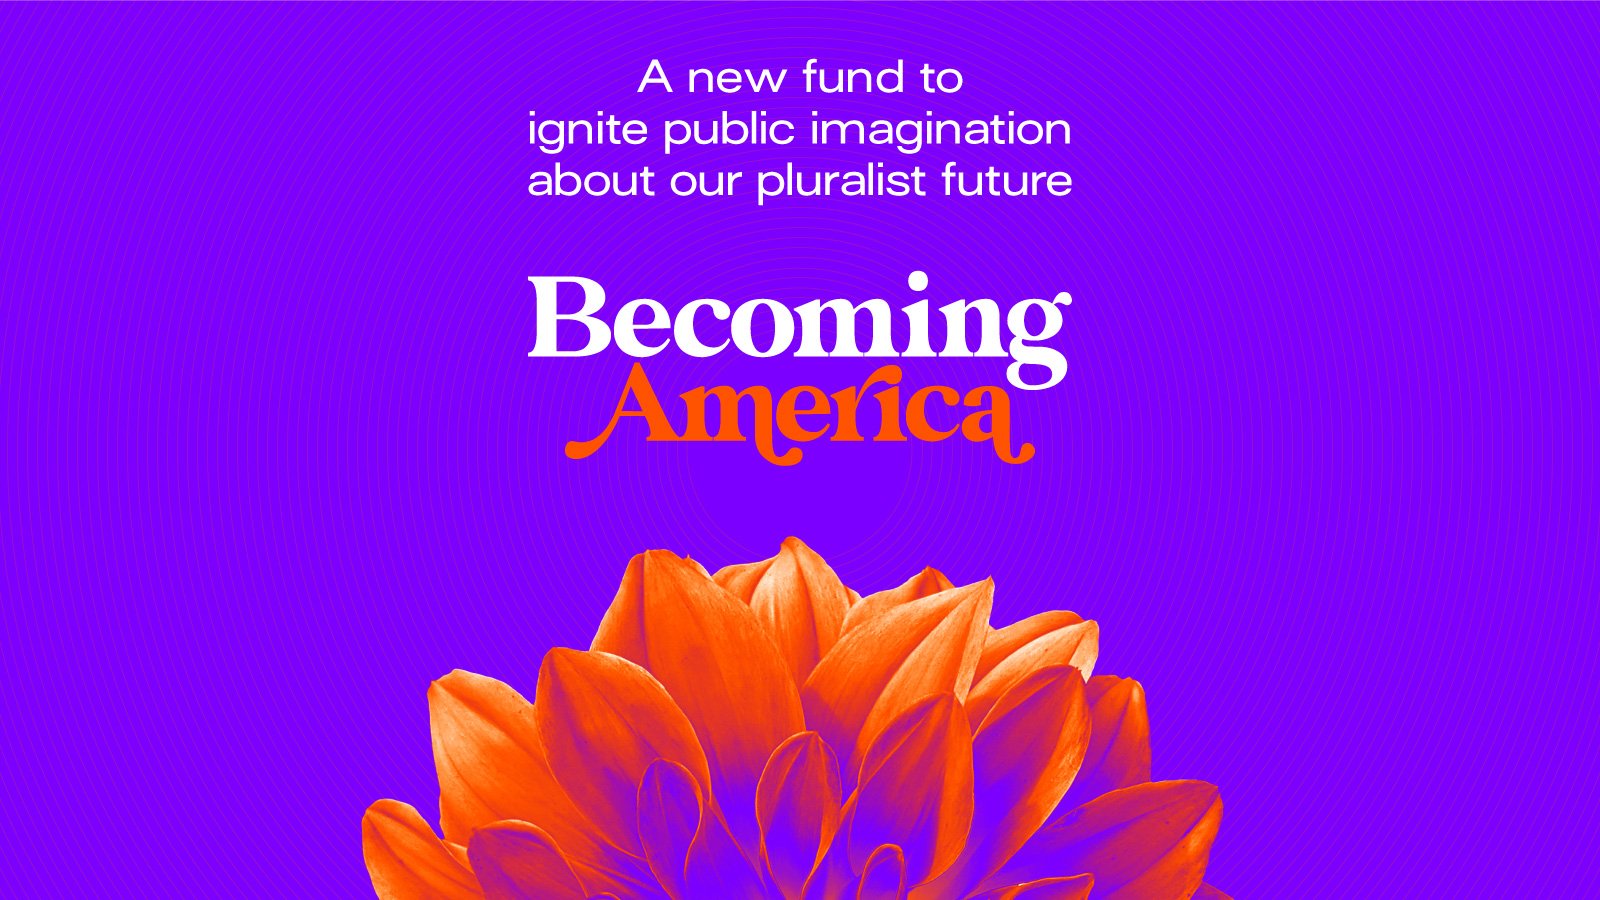 Becoming America Fund